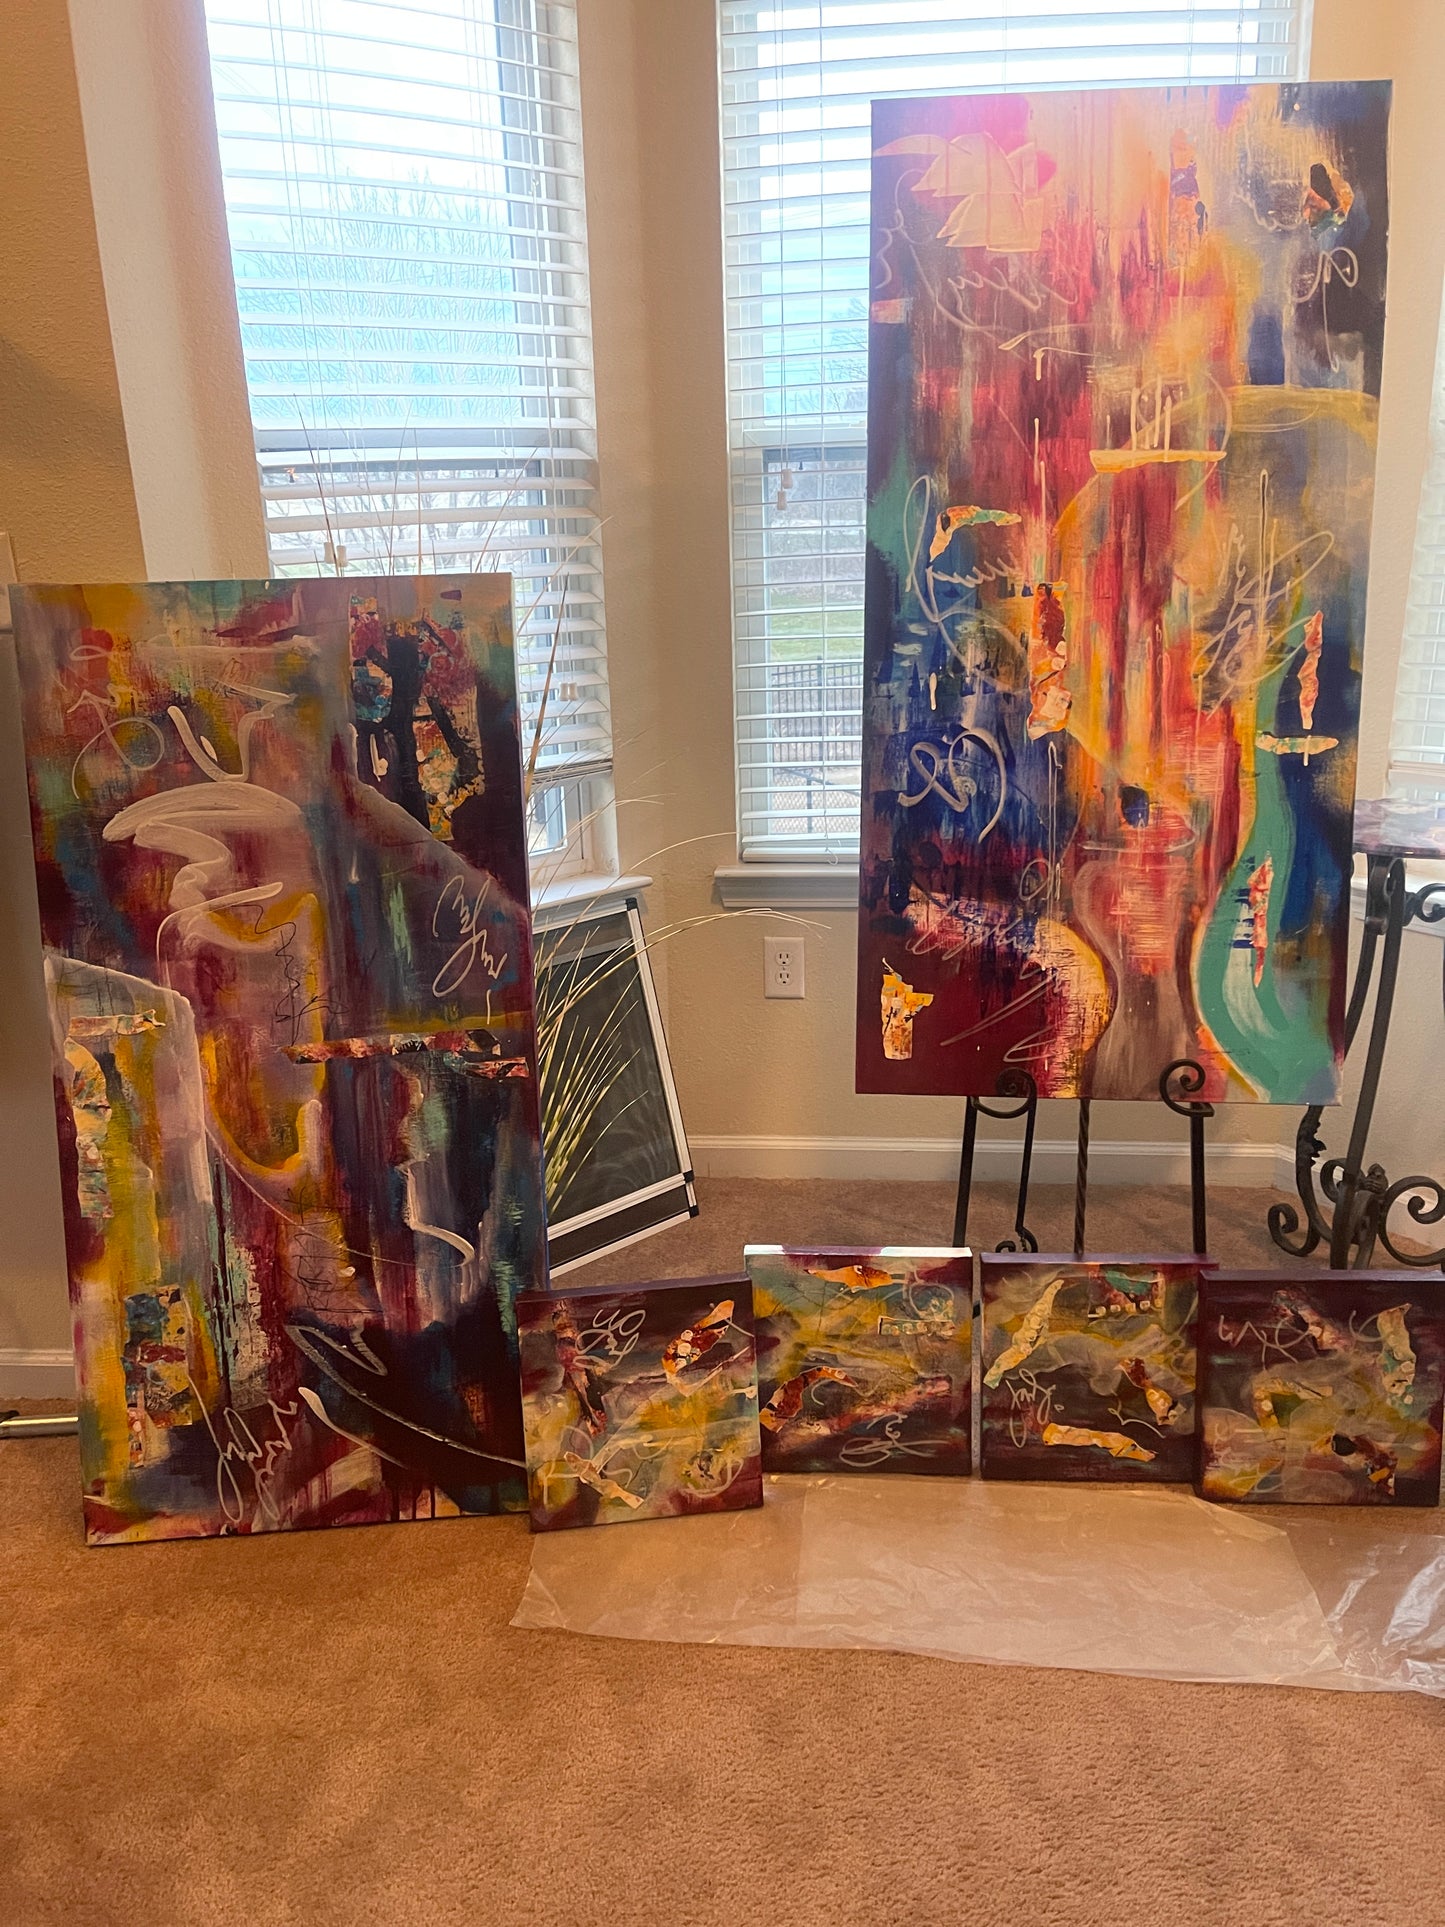 Dreamscape #2 (24x48 Gallery Wrapped Canvas) or 10 Months Interest Free with Art Money